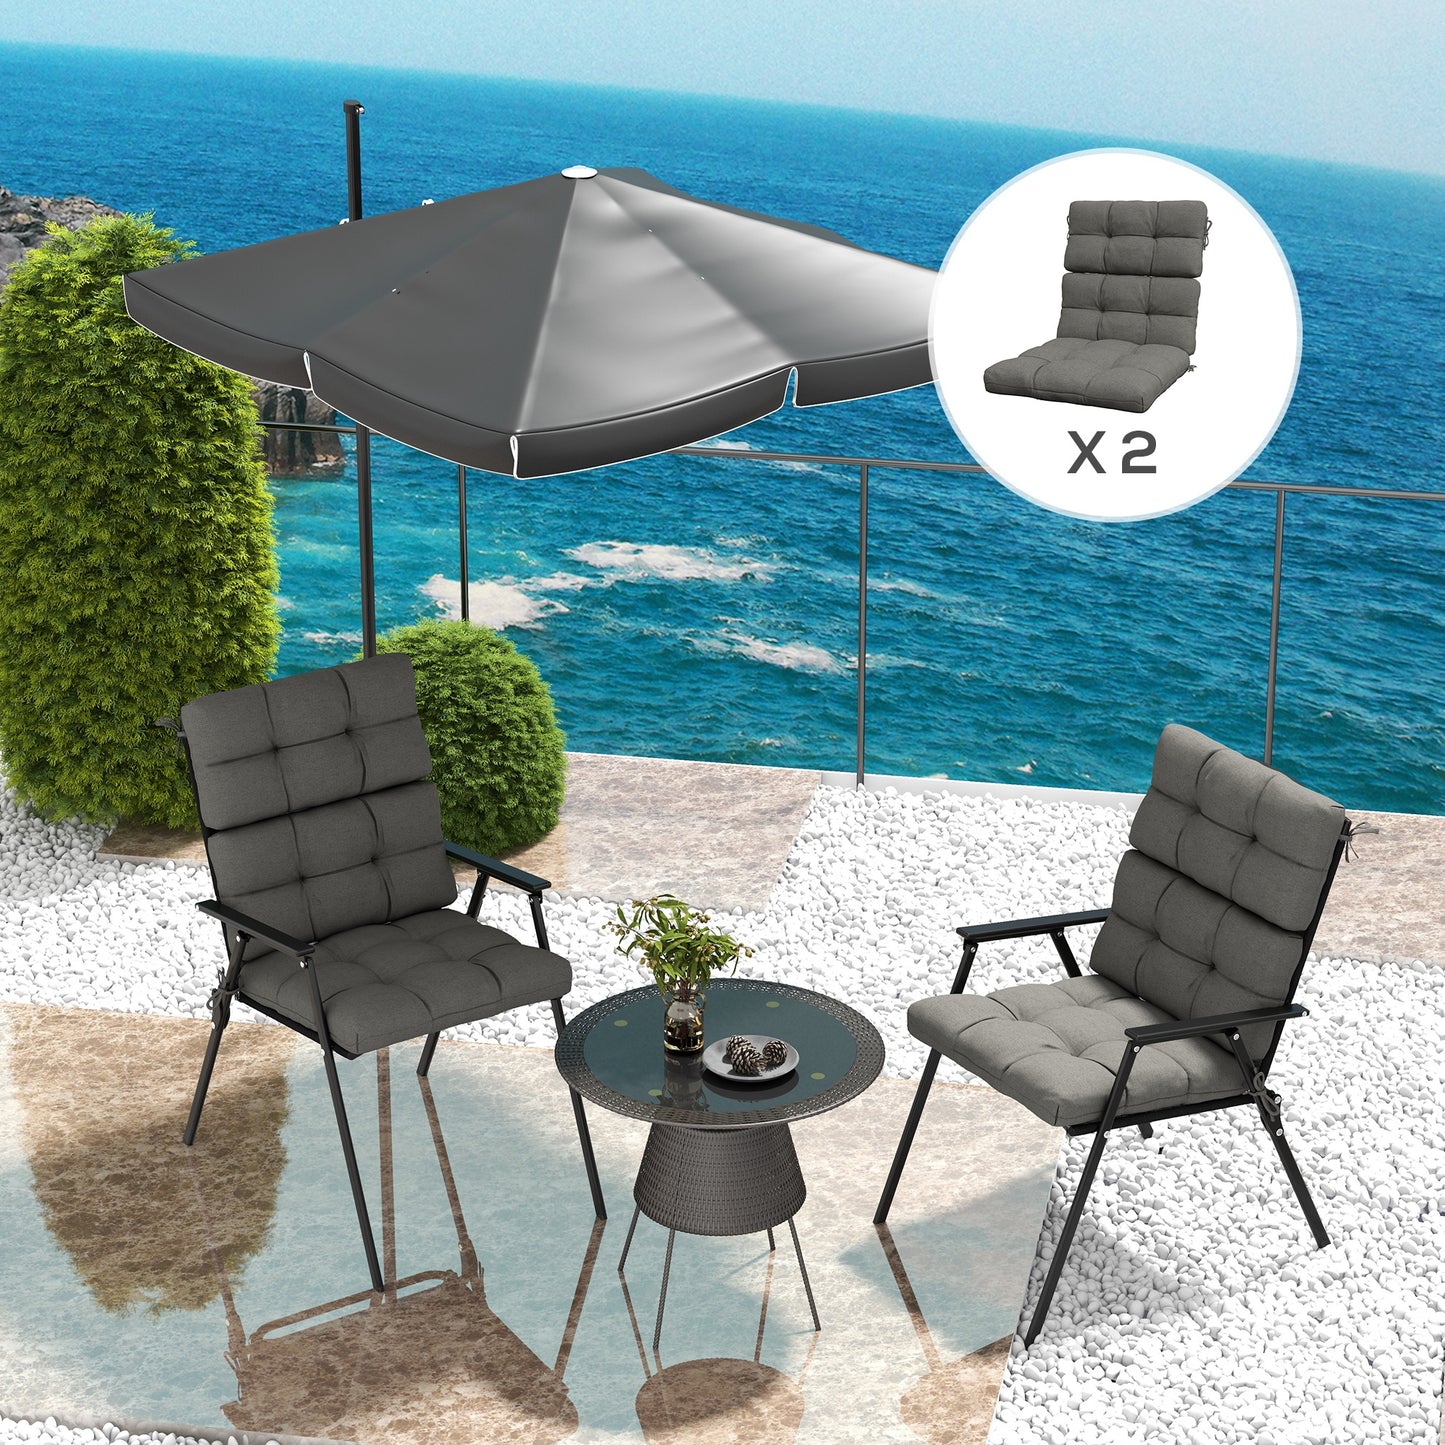 Outsunny Chair Cushion Set: Backrest & Seat Pads with Ties, Charcoal Grey